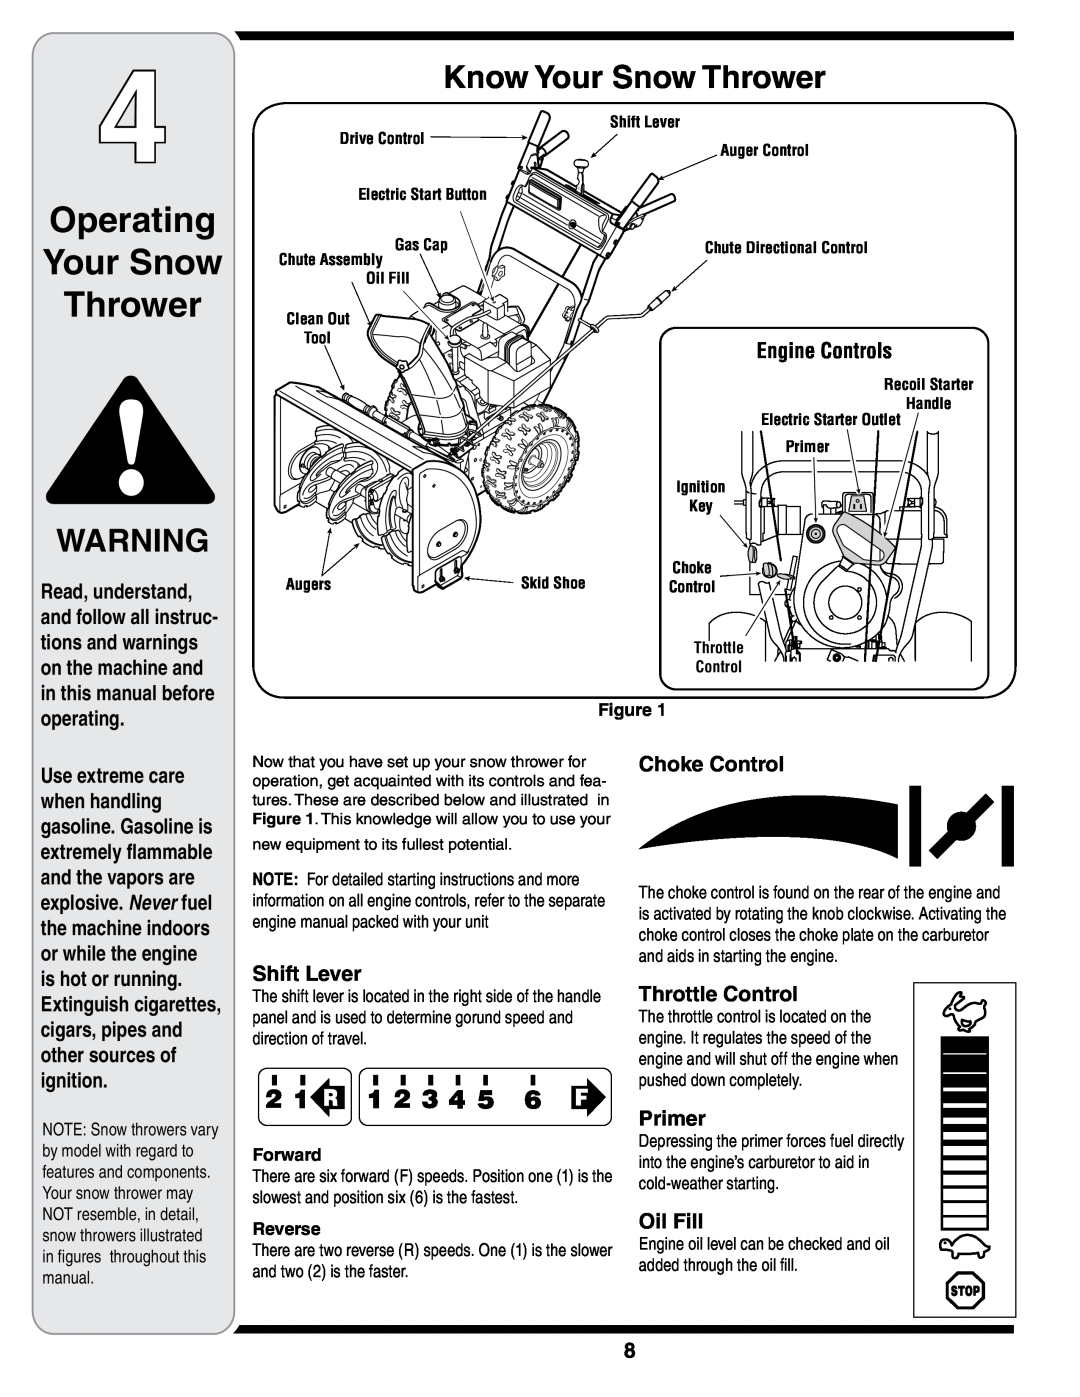 MTD 769-01275D warranty Operating Your Snow Thrower, Know Your Snow Thrower, Forward, Reverse 